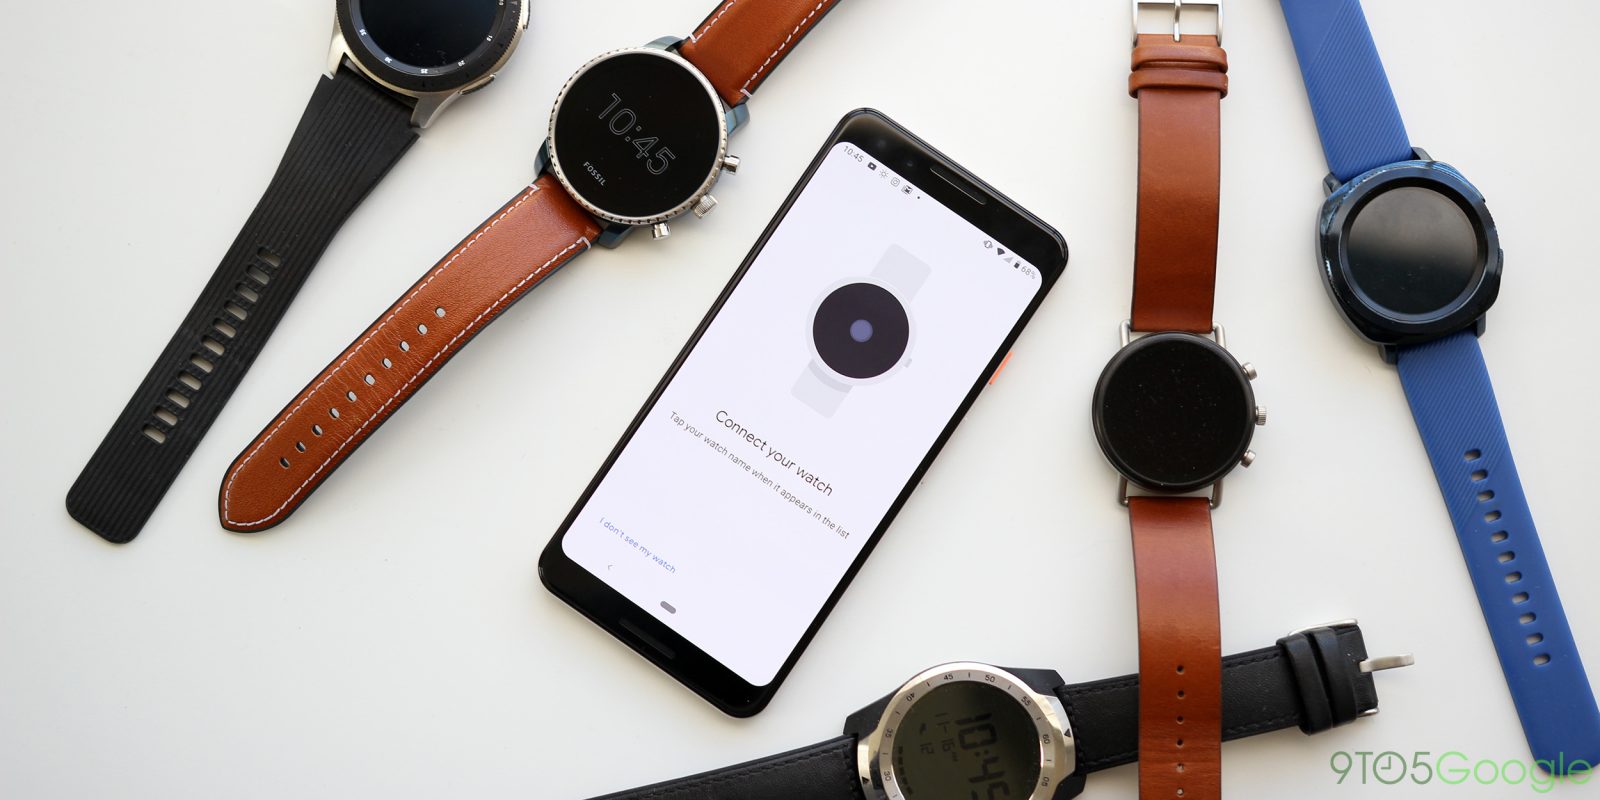 Best Android Smartwatches Wear OS, Samsung, more 9to5Google